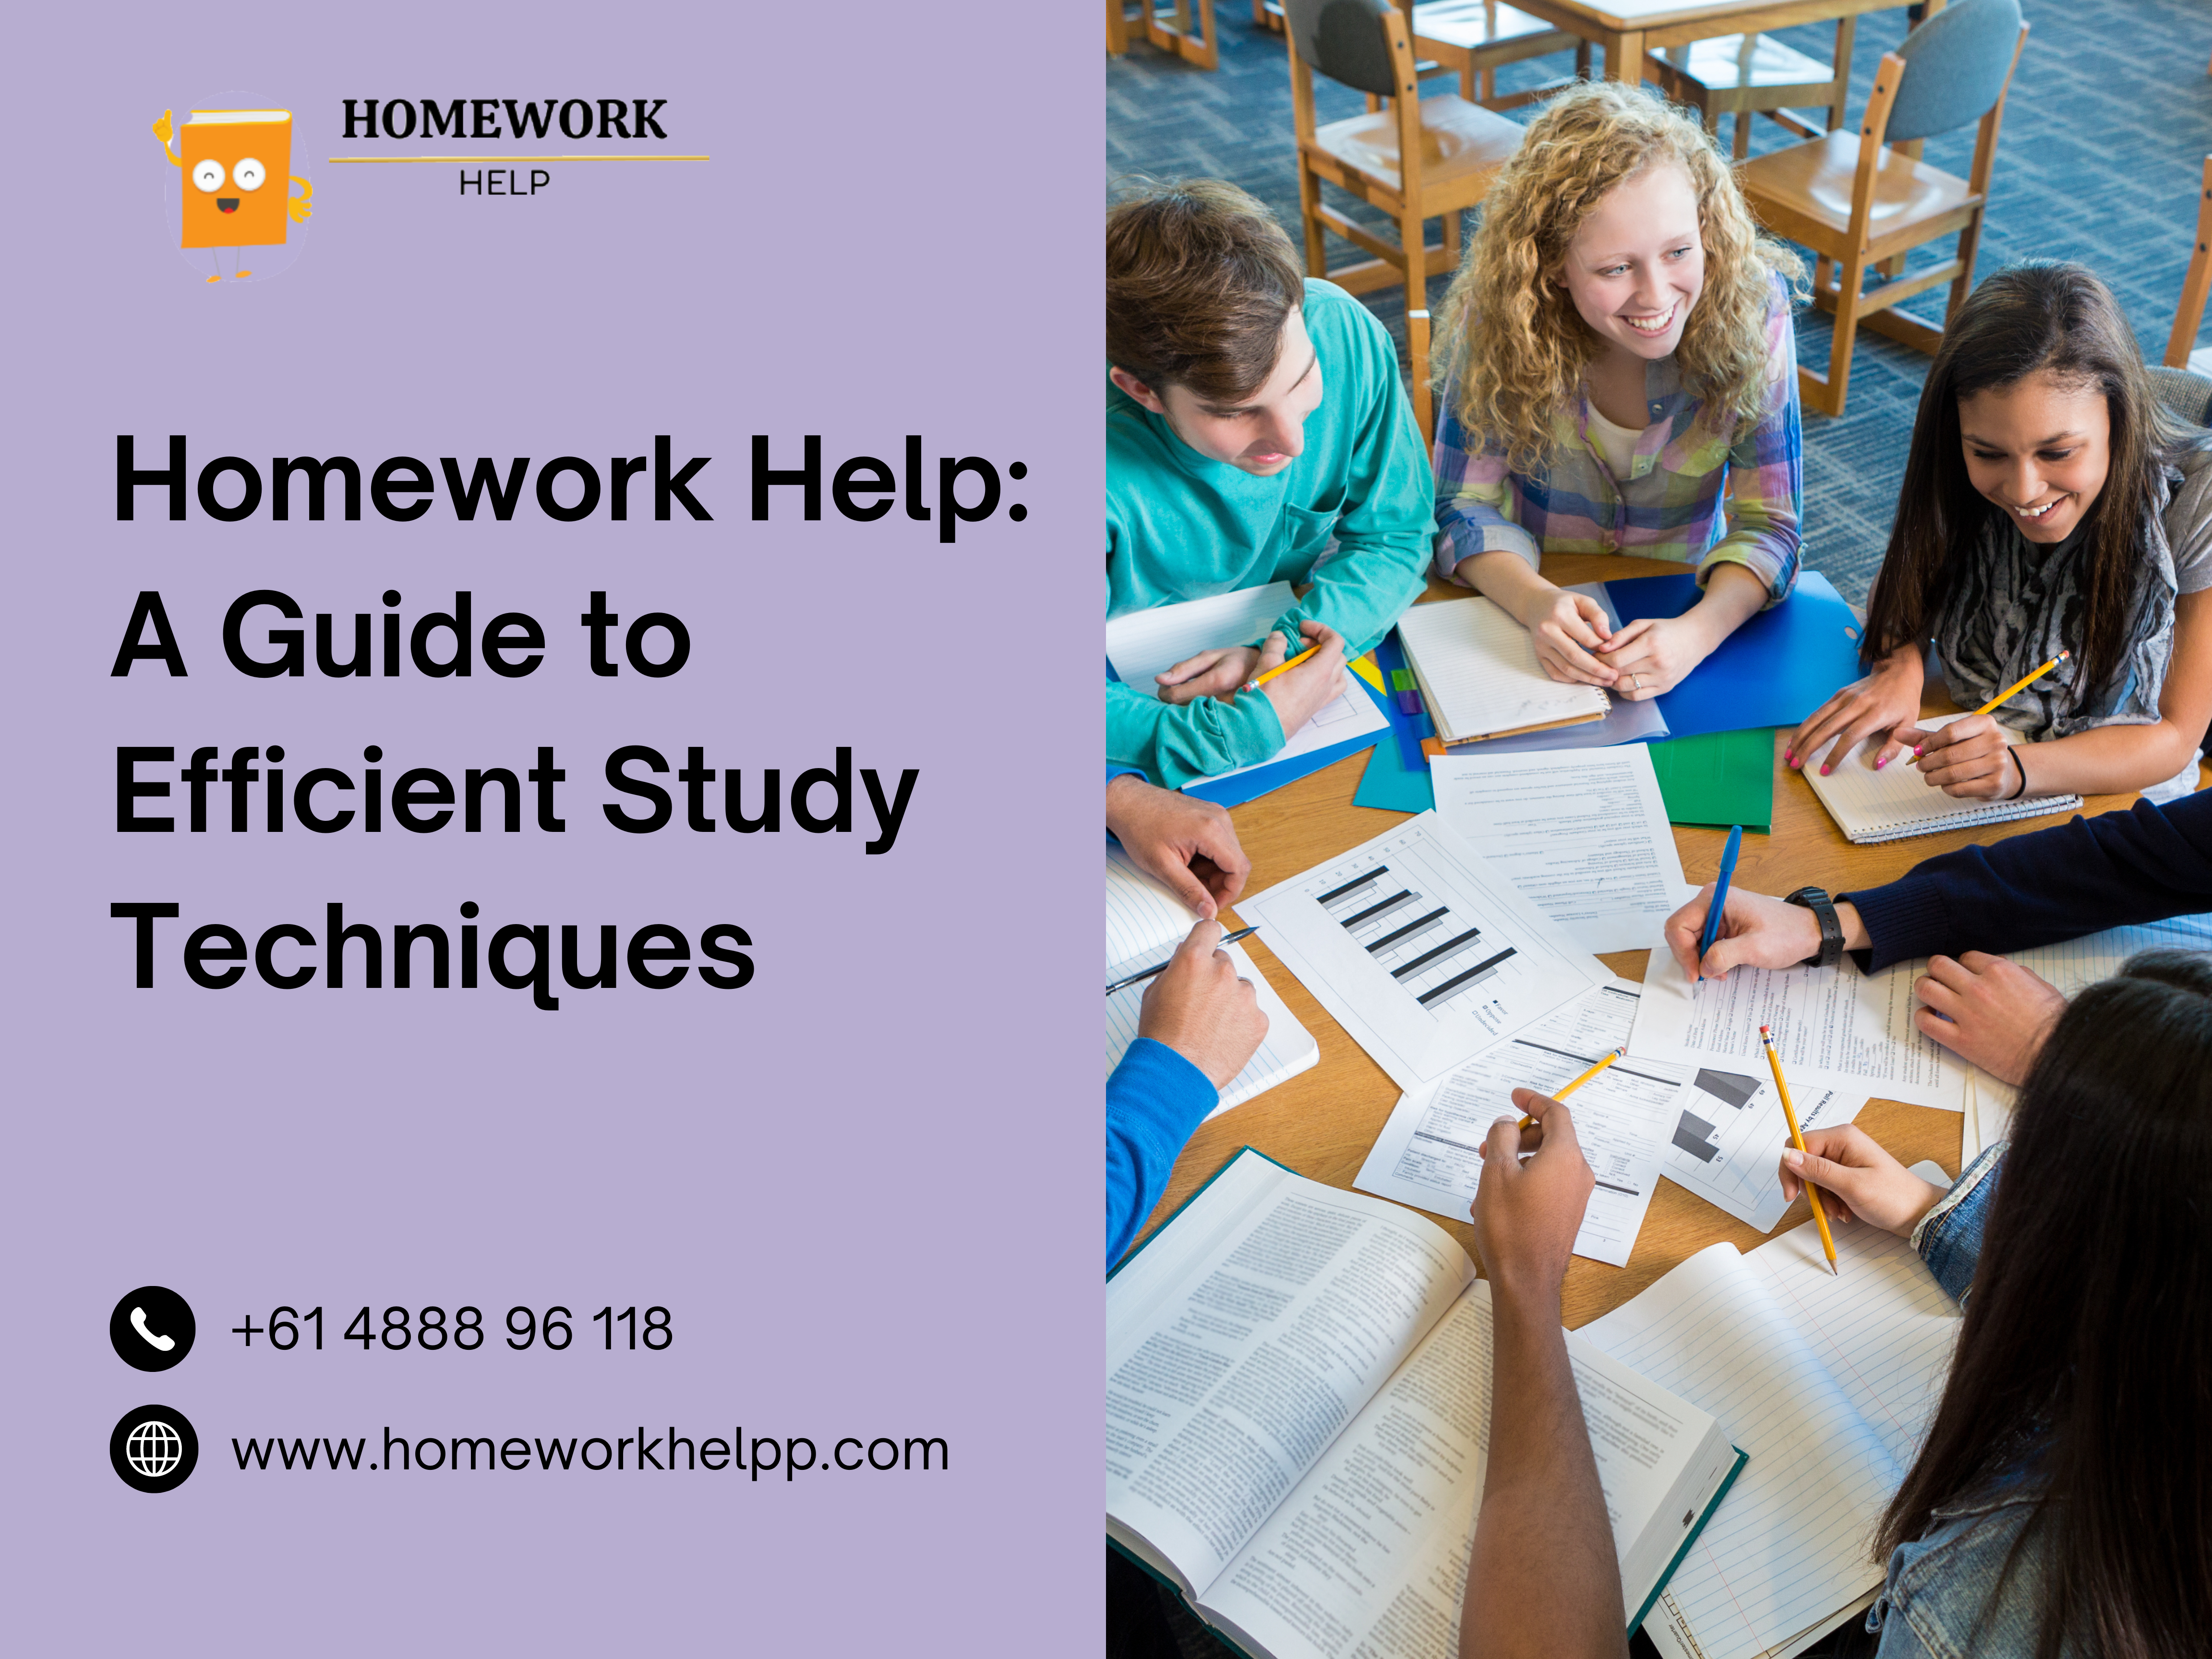 Homework Help: A Guide to Efficient Study Techniques